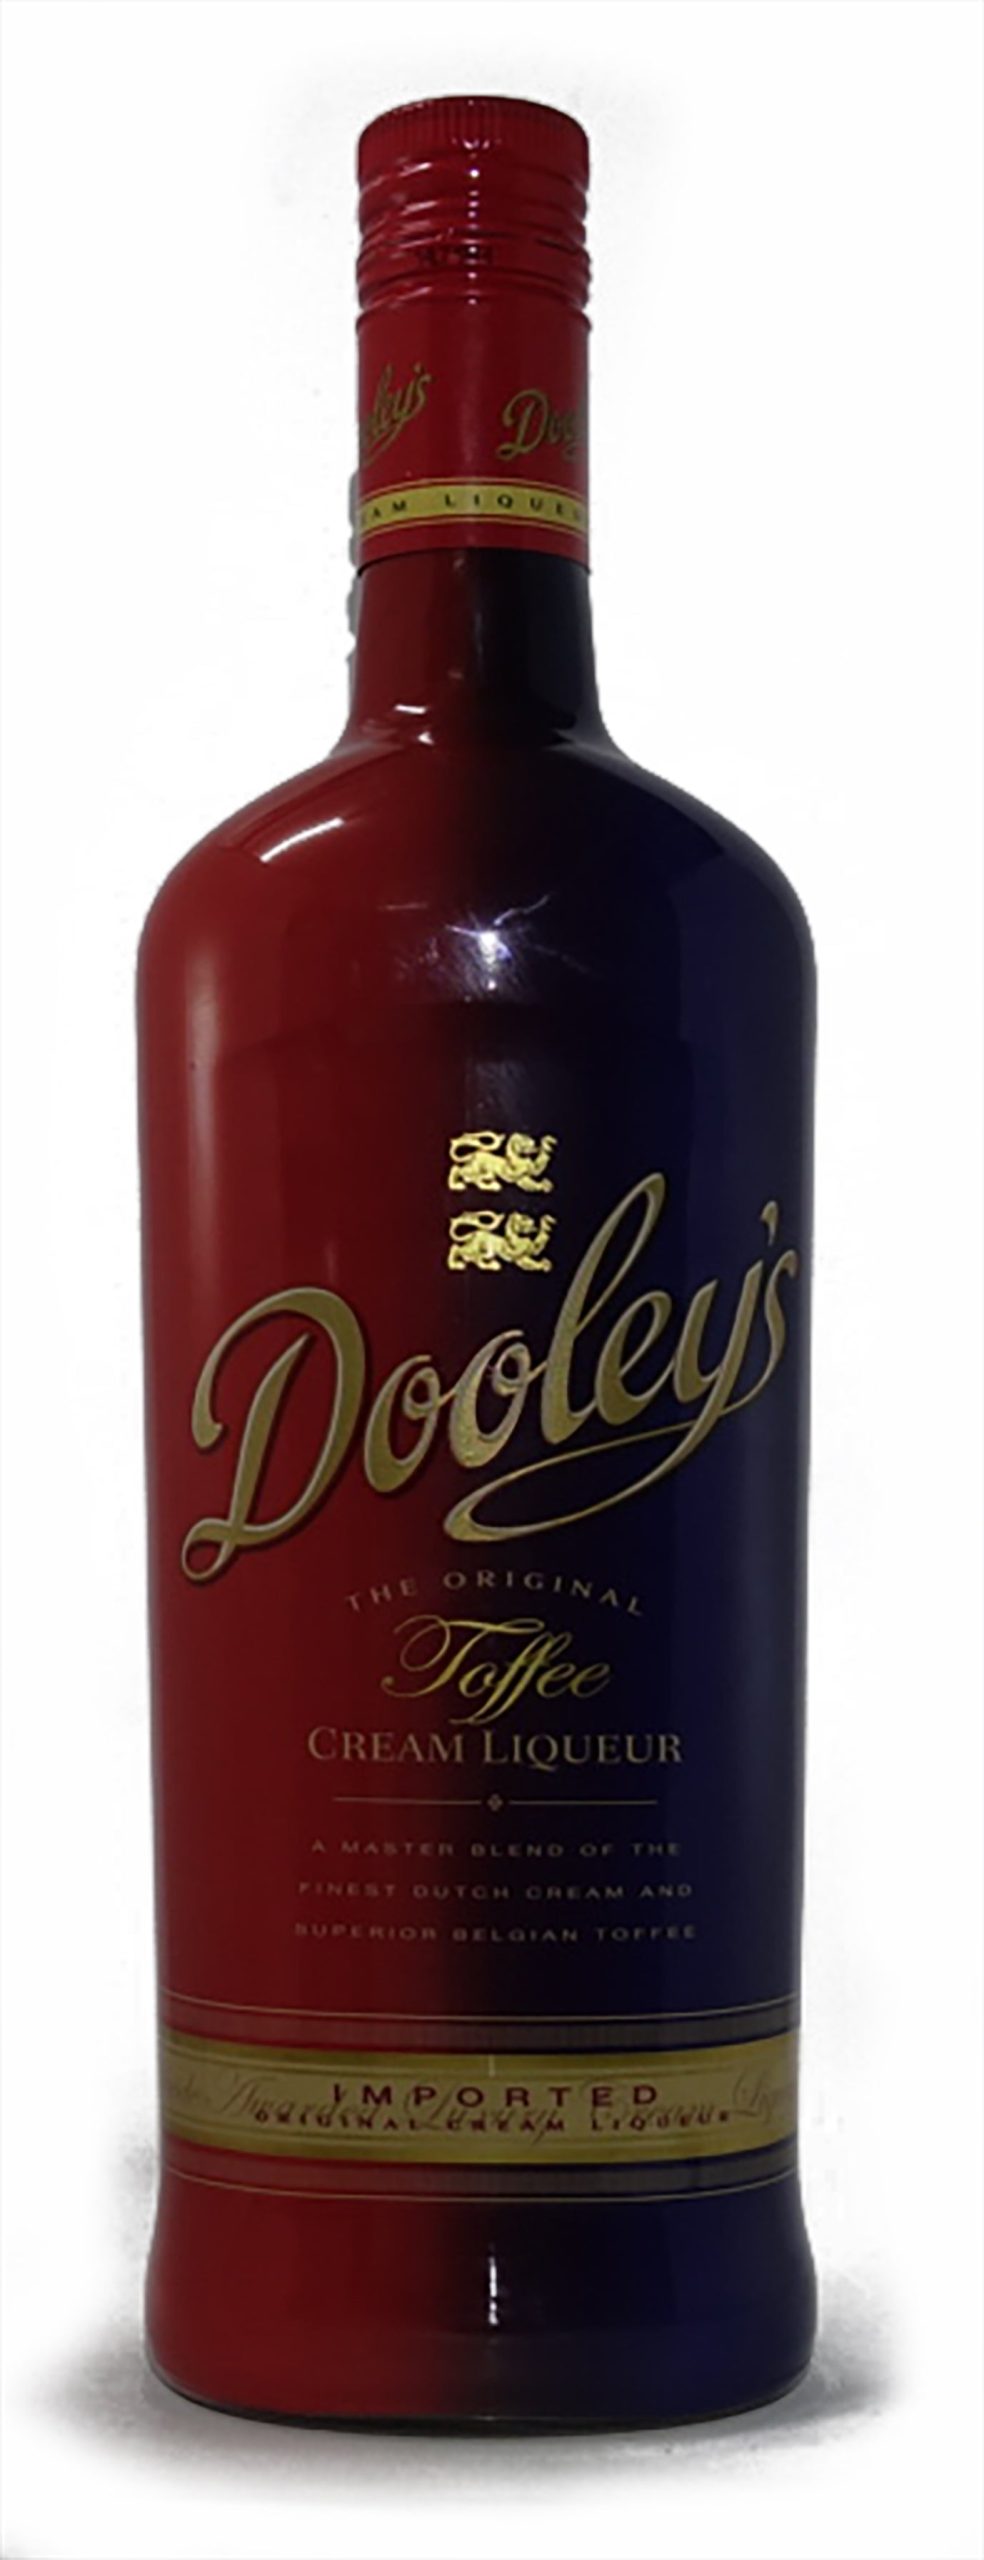 Visit our website to find the best Copy of Dooley's Toffee Cream Liqueur 1  Litre Dooleys at the most affordable price